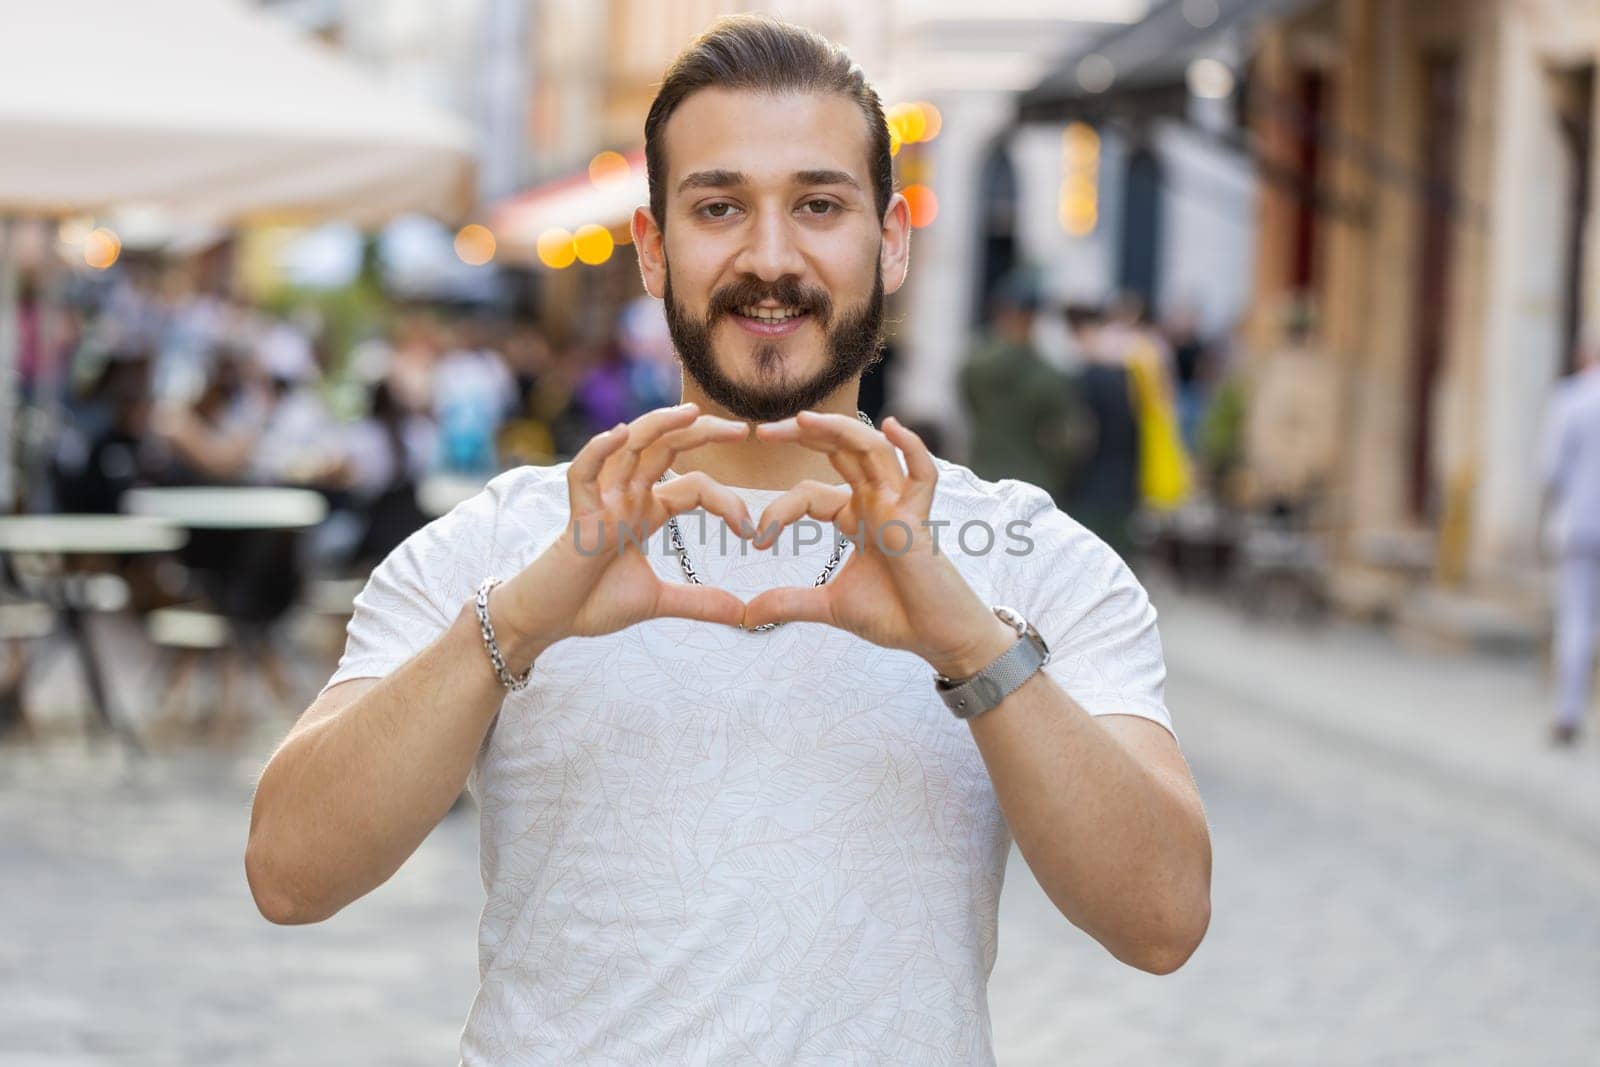 I love you. Young man makes symbol of love, showing heart sign to camera, express romantic feelings, express sincere positive feelings. Charity, gratitude, donation. Outdoors in urban city street